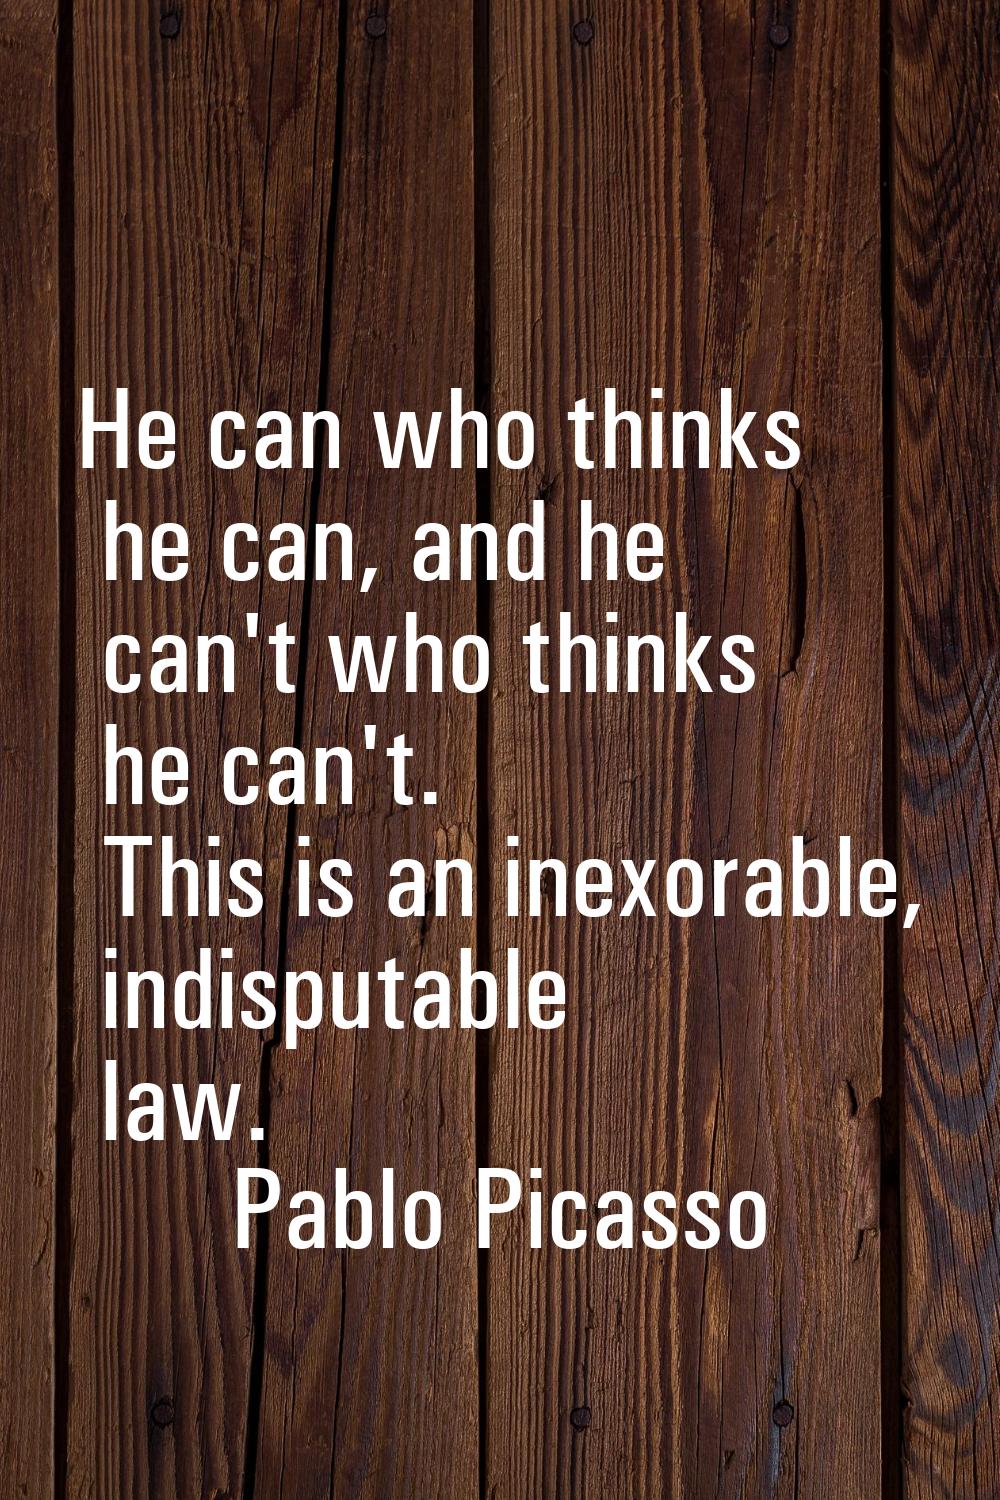 He can who thinks he can, and he can't who thinks he can't. This is an inexorable, indisputable law